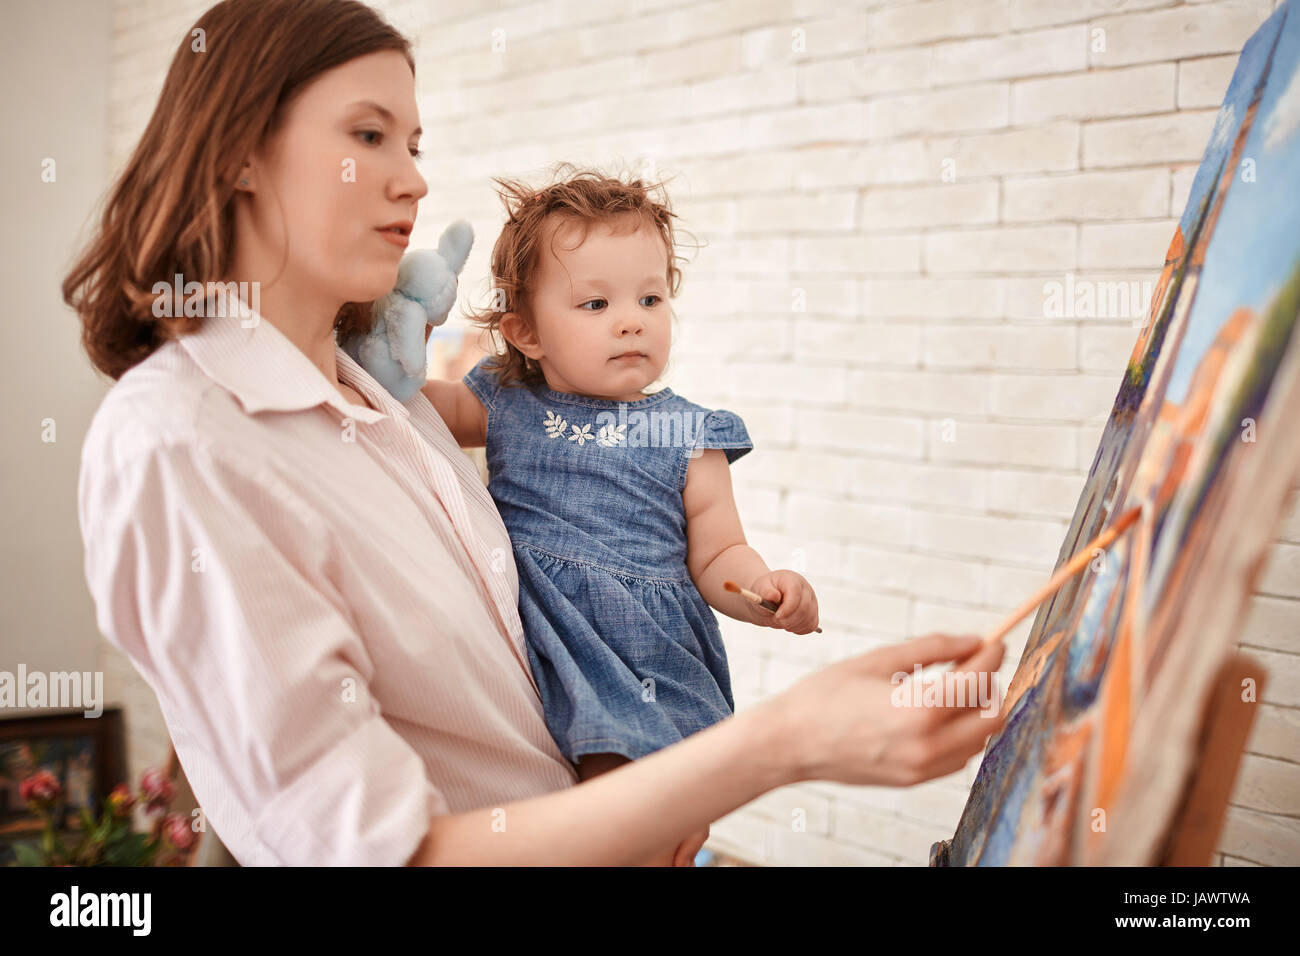 Young Woman Painting with Child in Art Studio Stock Photo